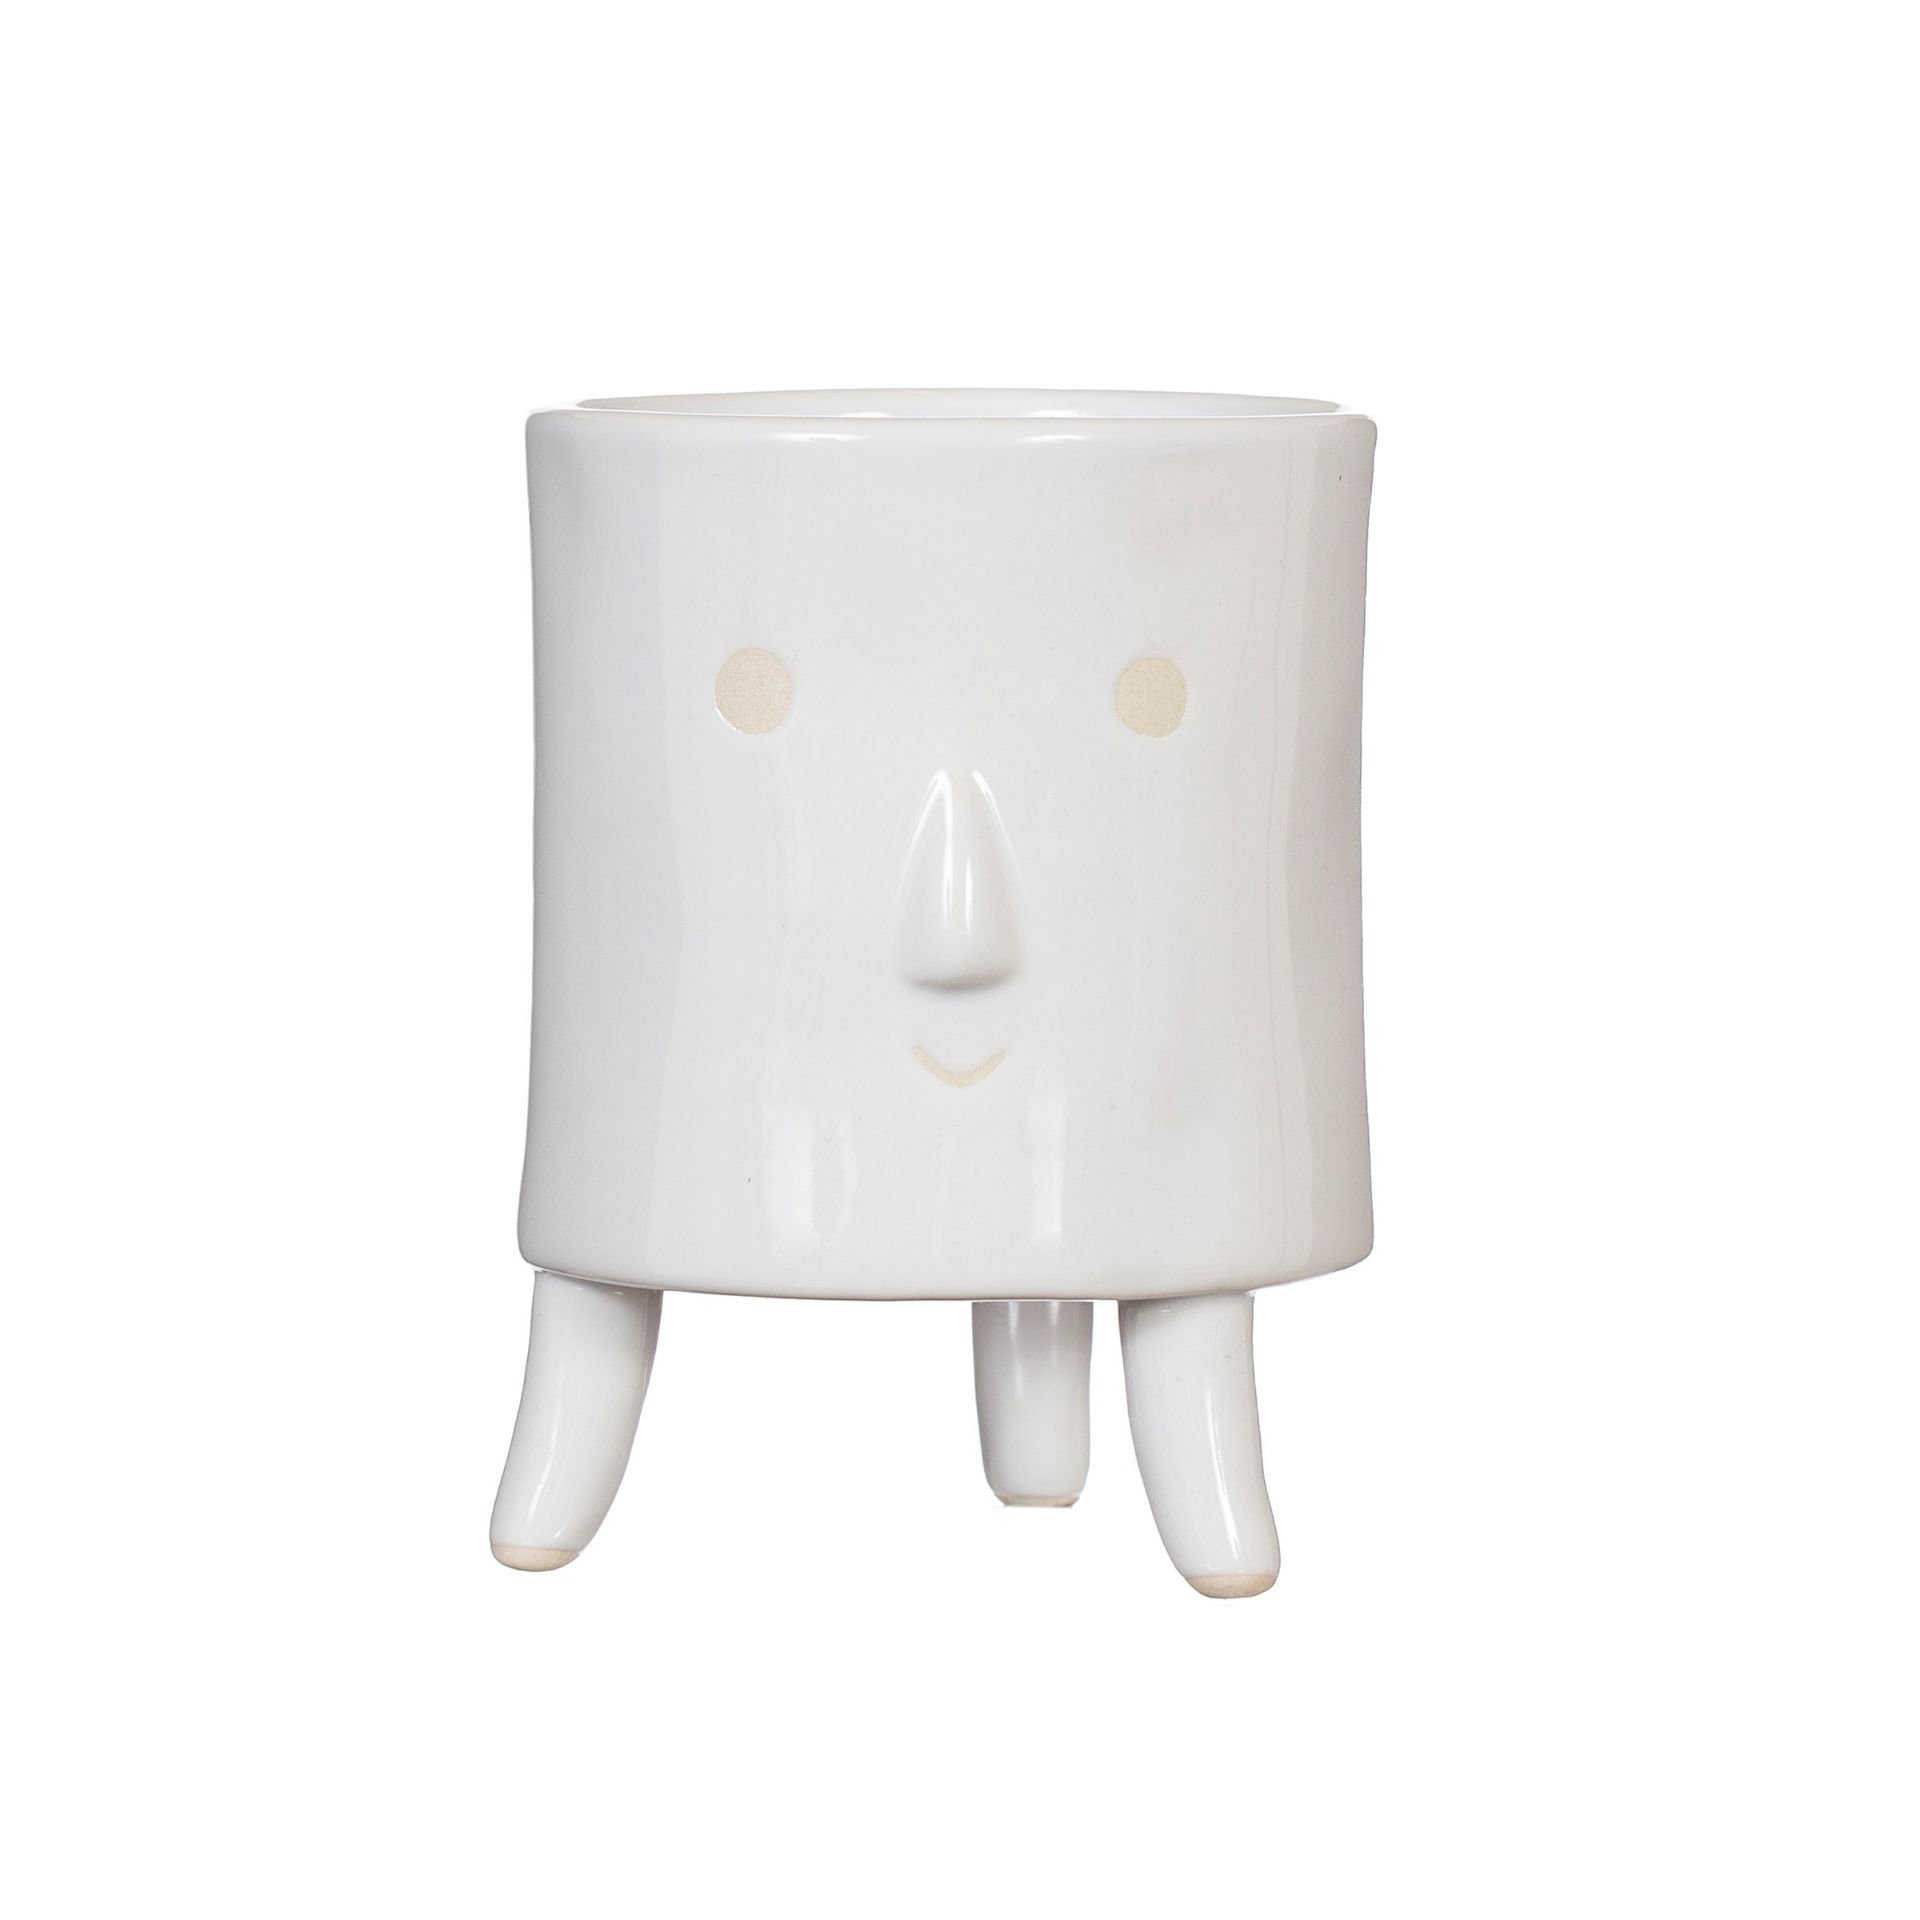 RRP £12.99 - NEW SASS & BELLE SMALL 9CM SMILLEY FACED GLAZED PLANTER WITH LEGS